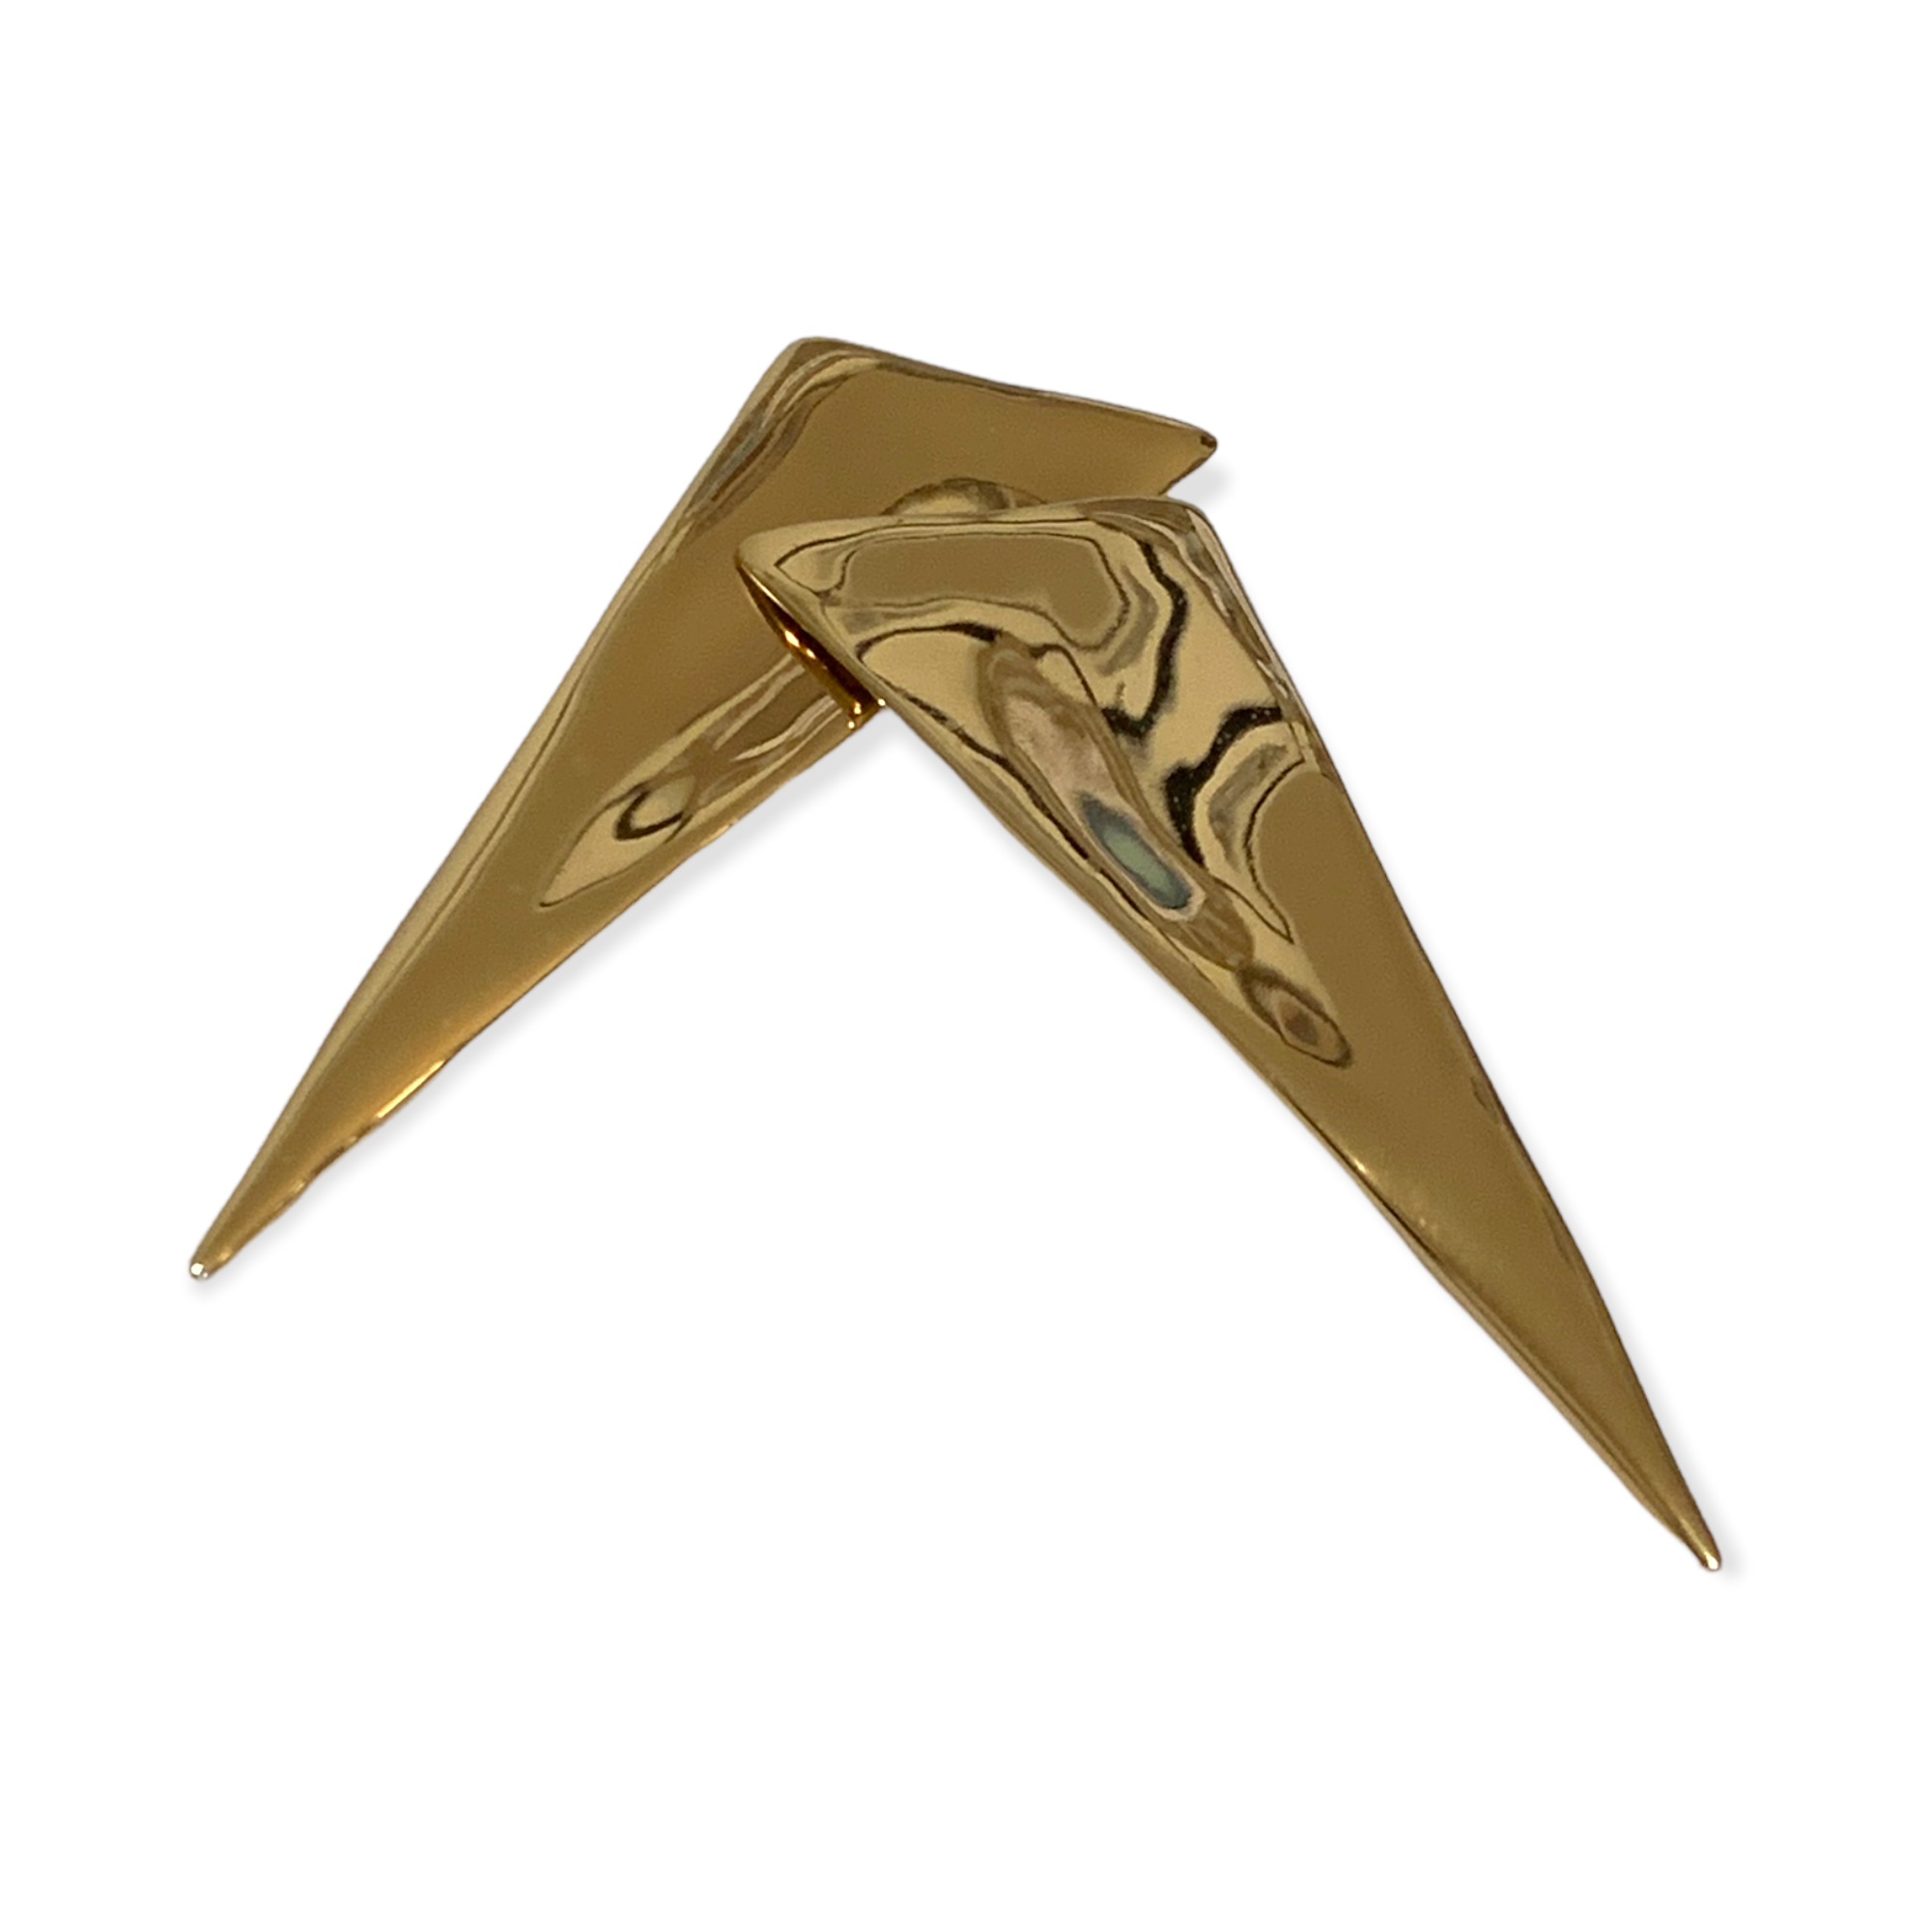 Alexis Bittar Reversible Gold Tone Triangular Earrings with Stud Back